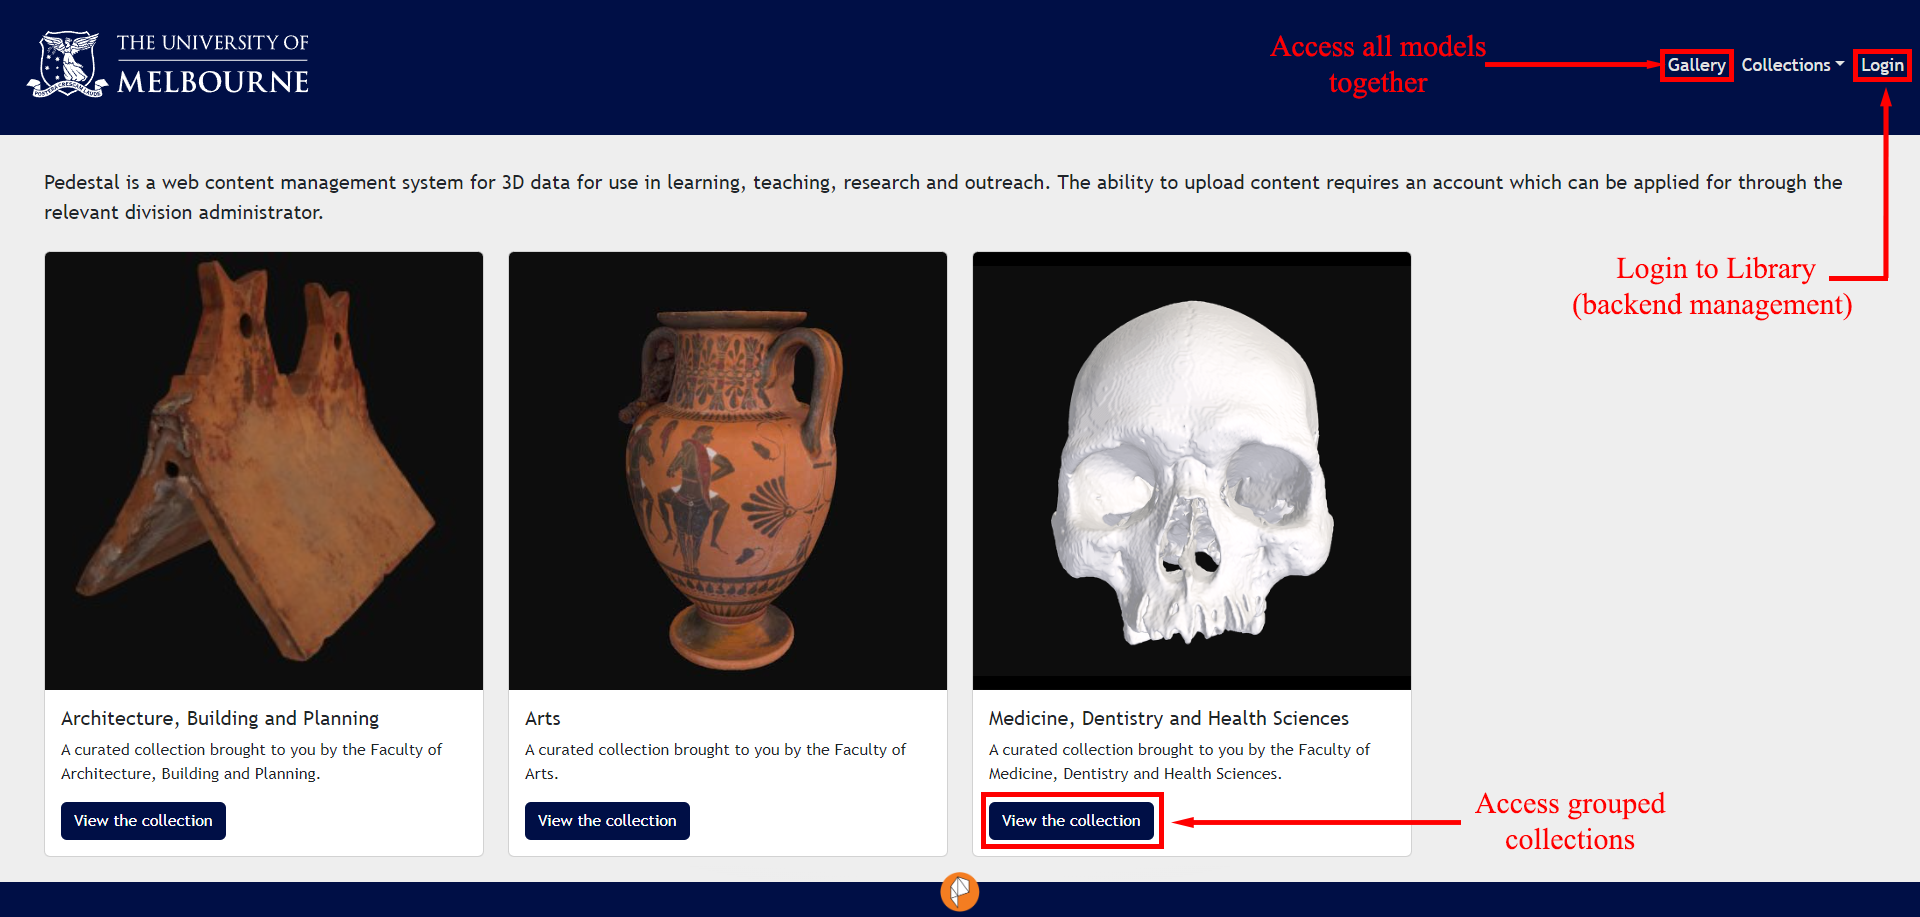 Gallery, Login, and View Collection icons indicated in Pedestal 3D interface